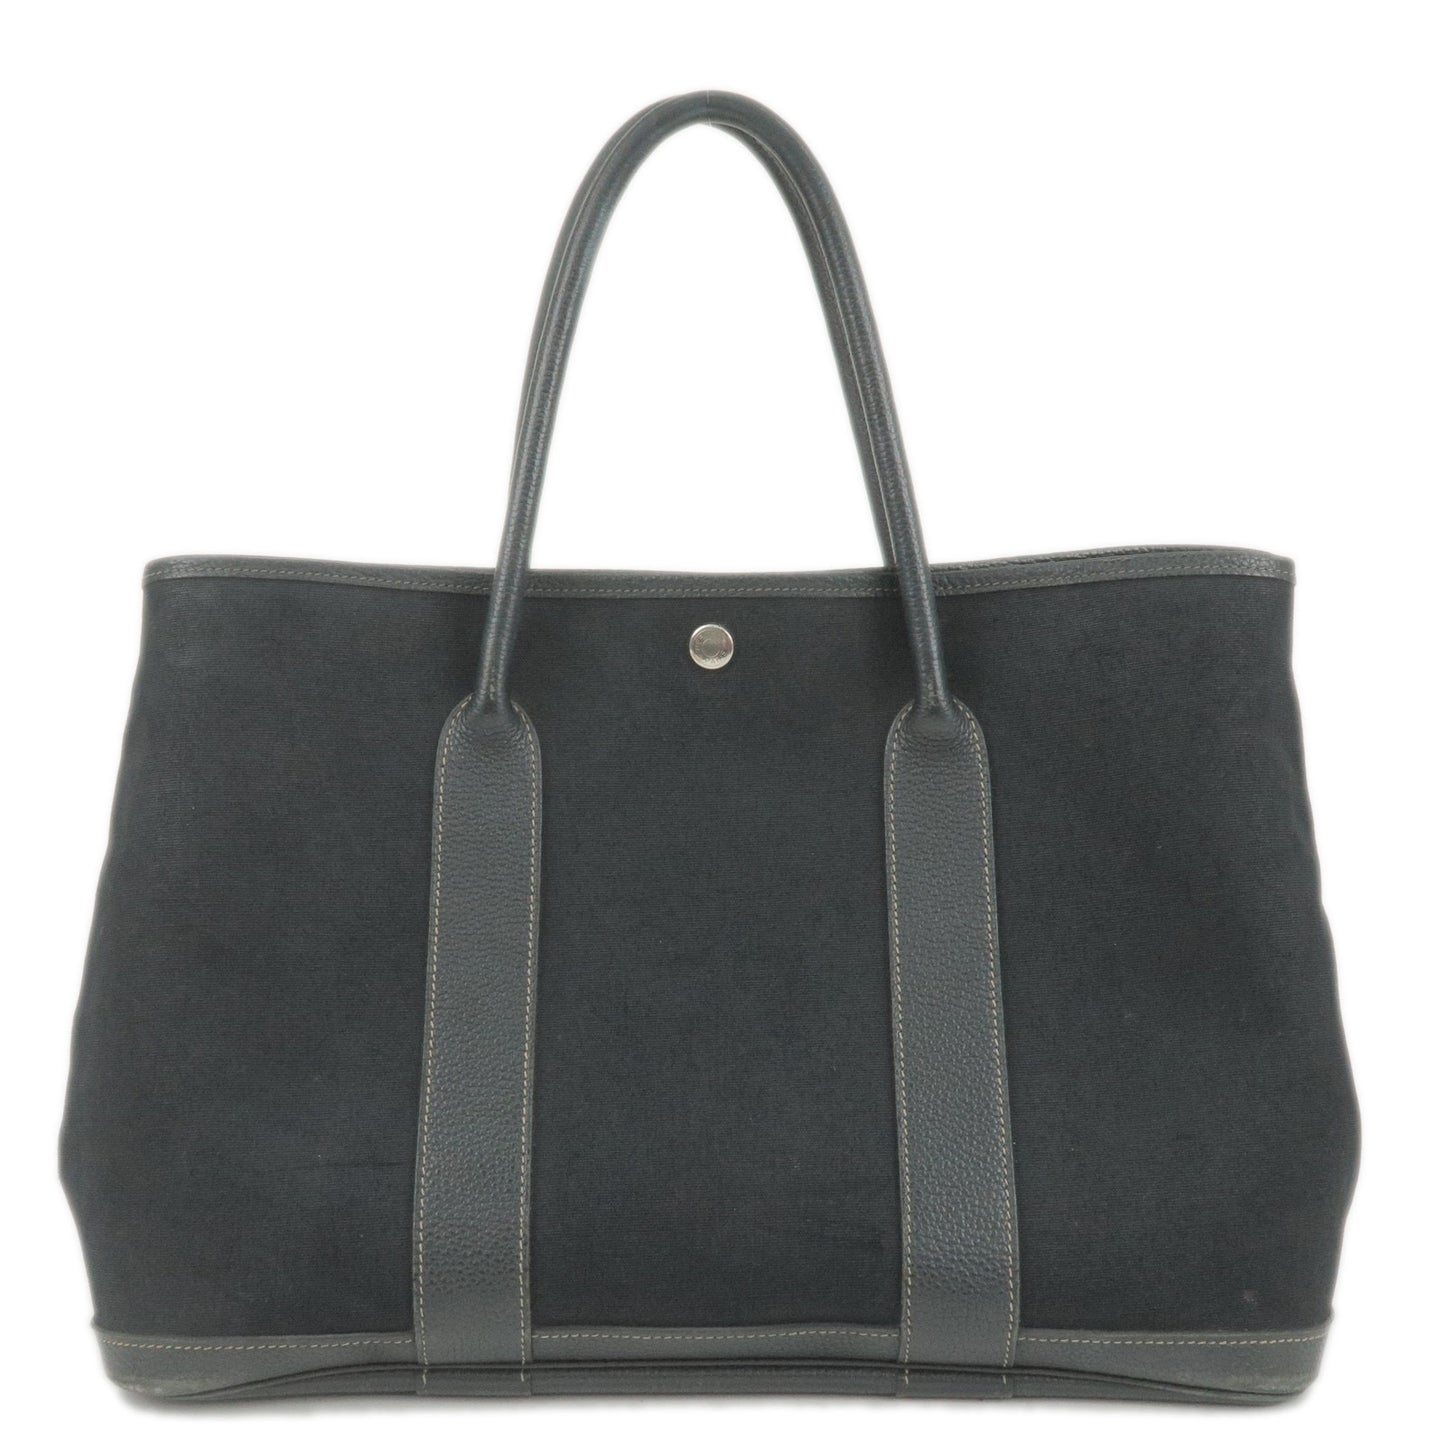 HERMES-Garden-Party-PM-Canvas-Leather-Tote-Bag-Black